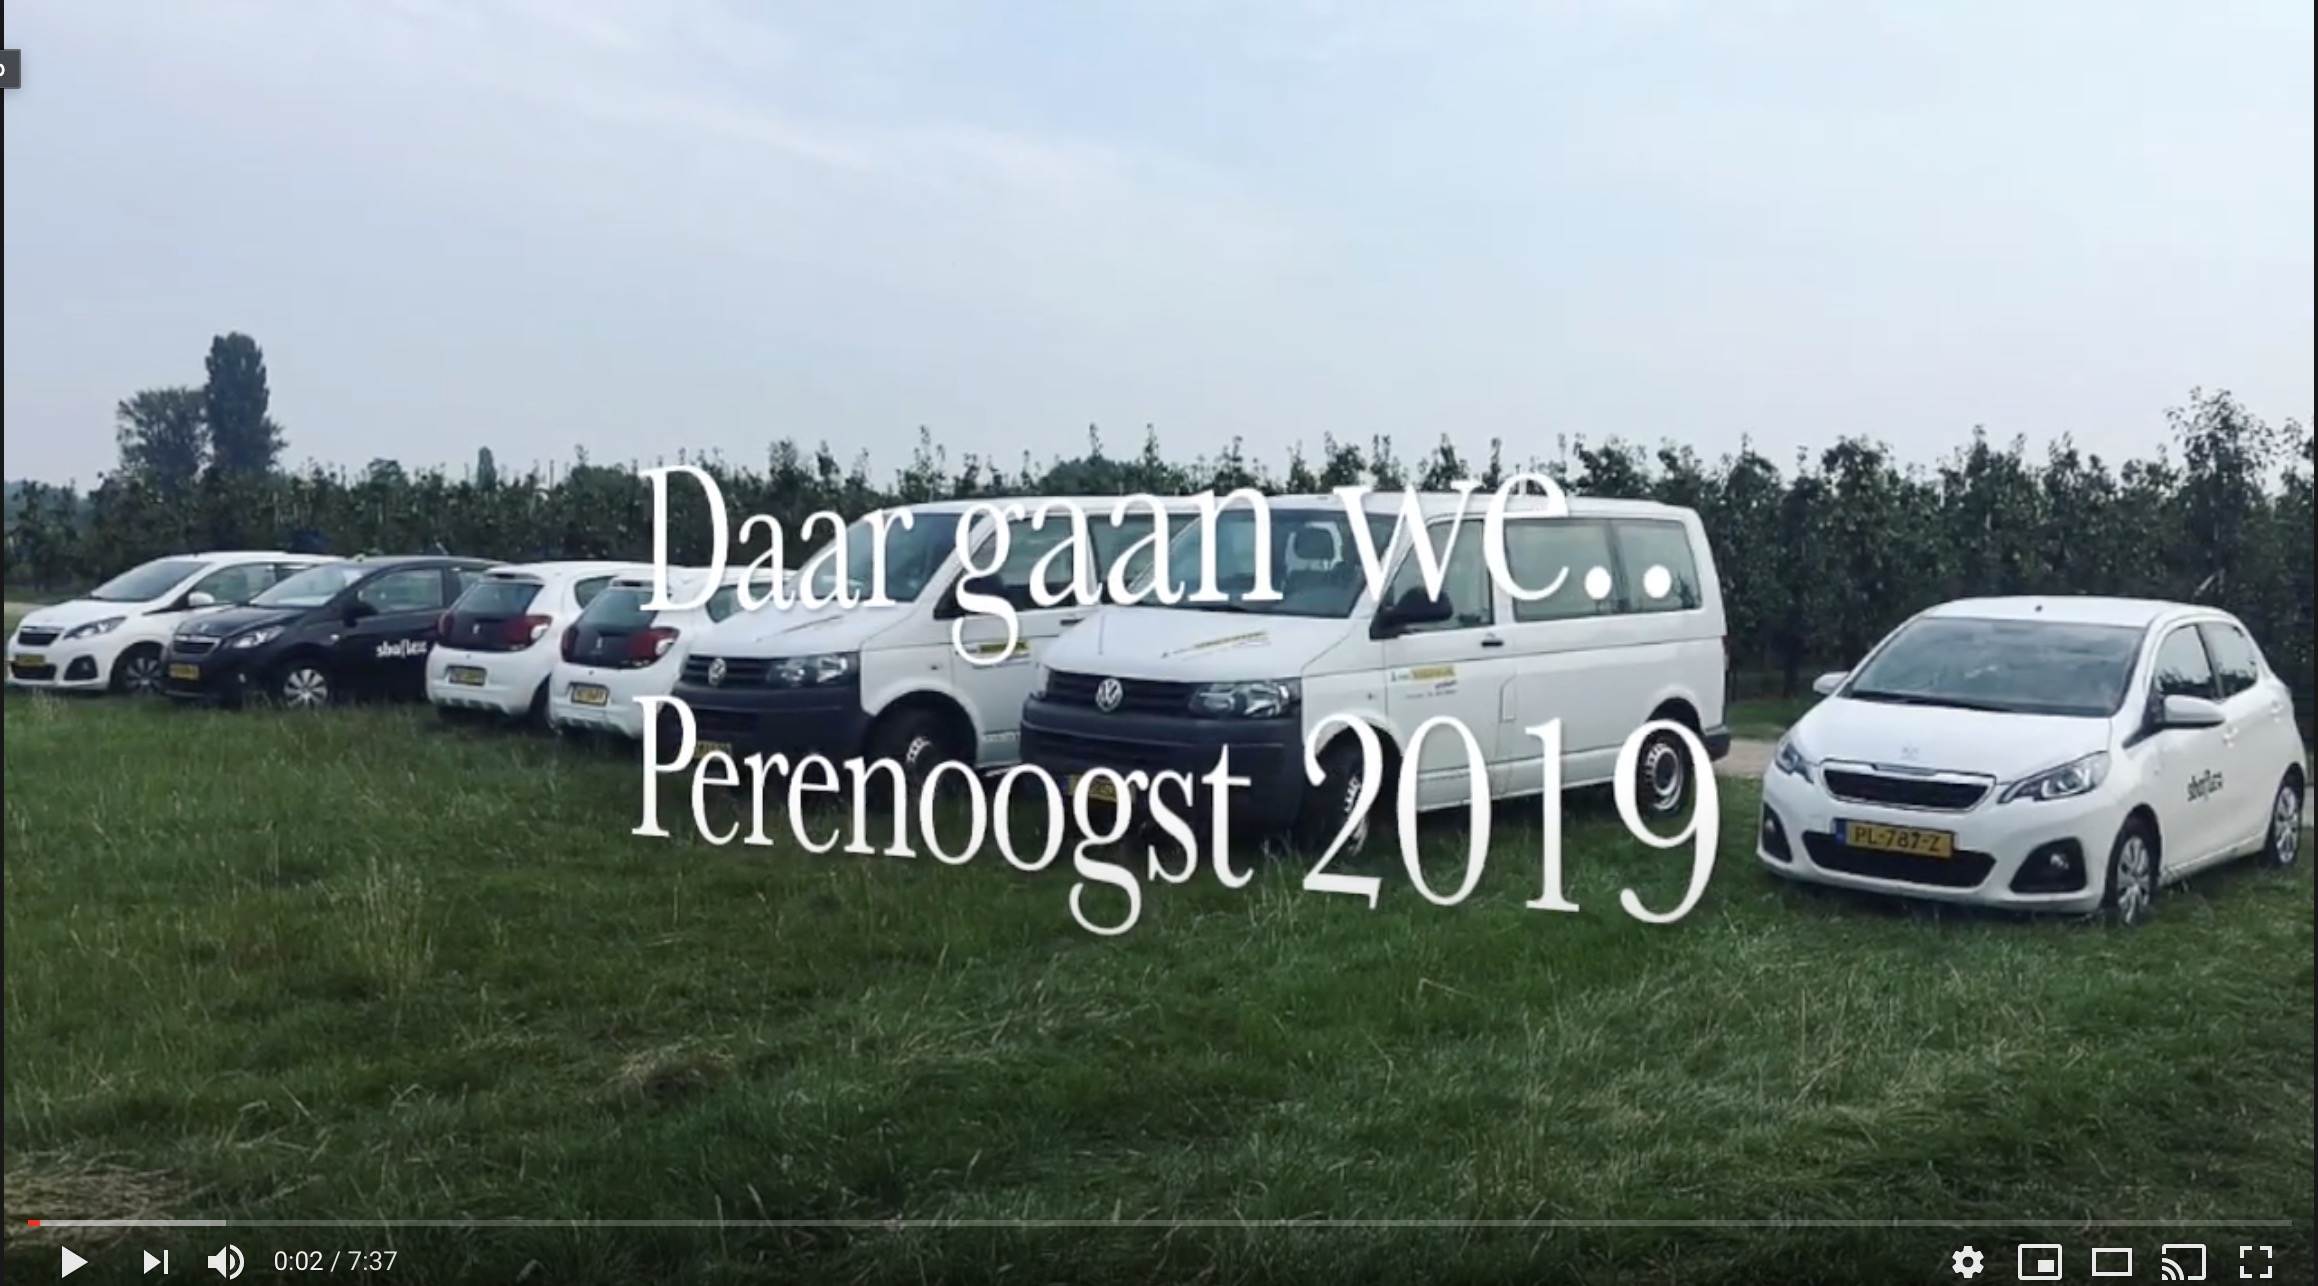 Perenoogst 2019